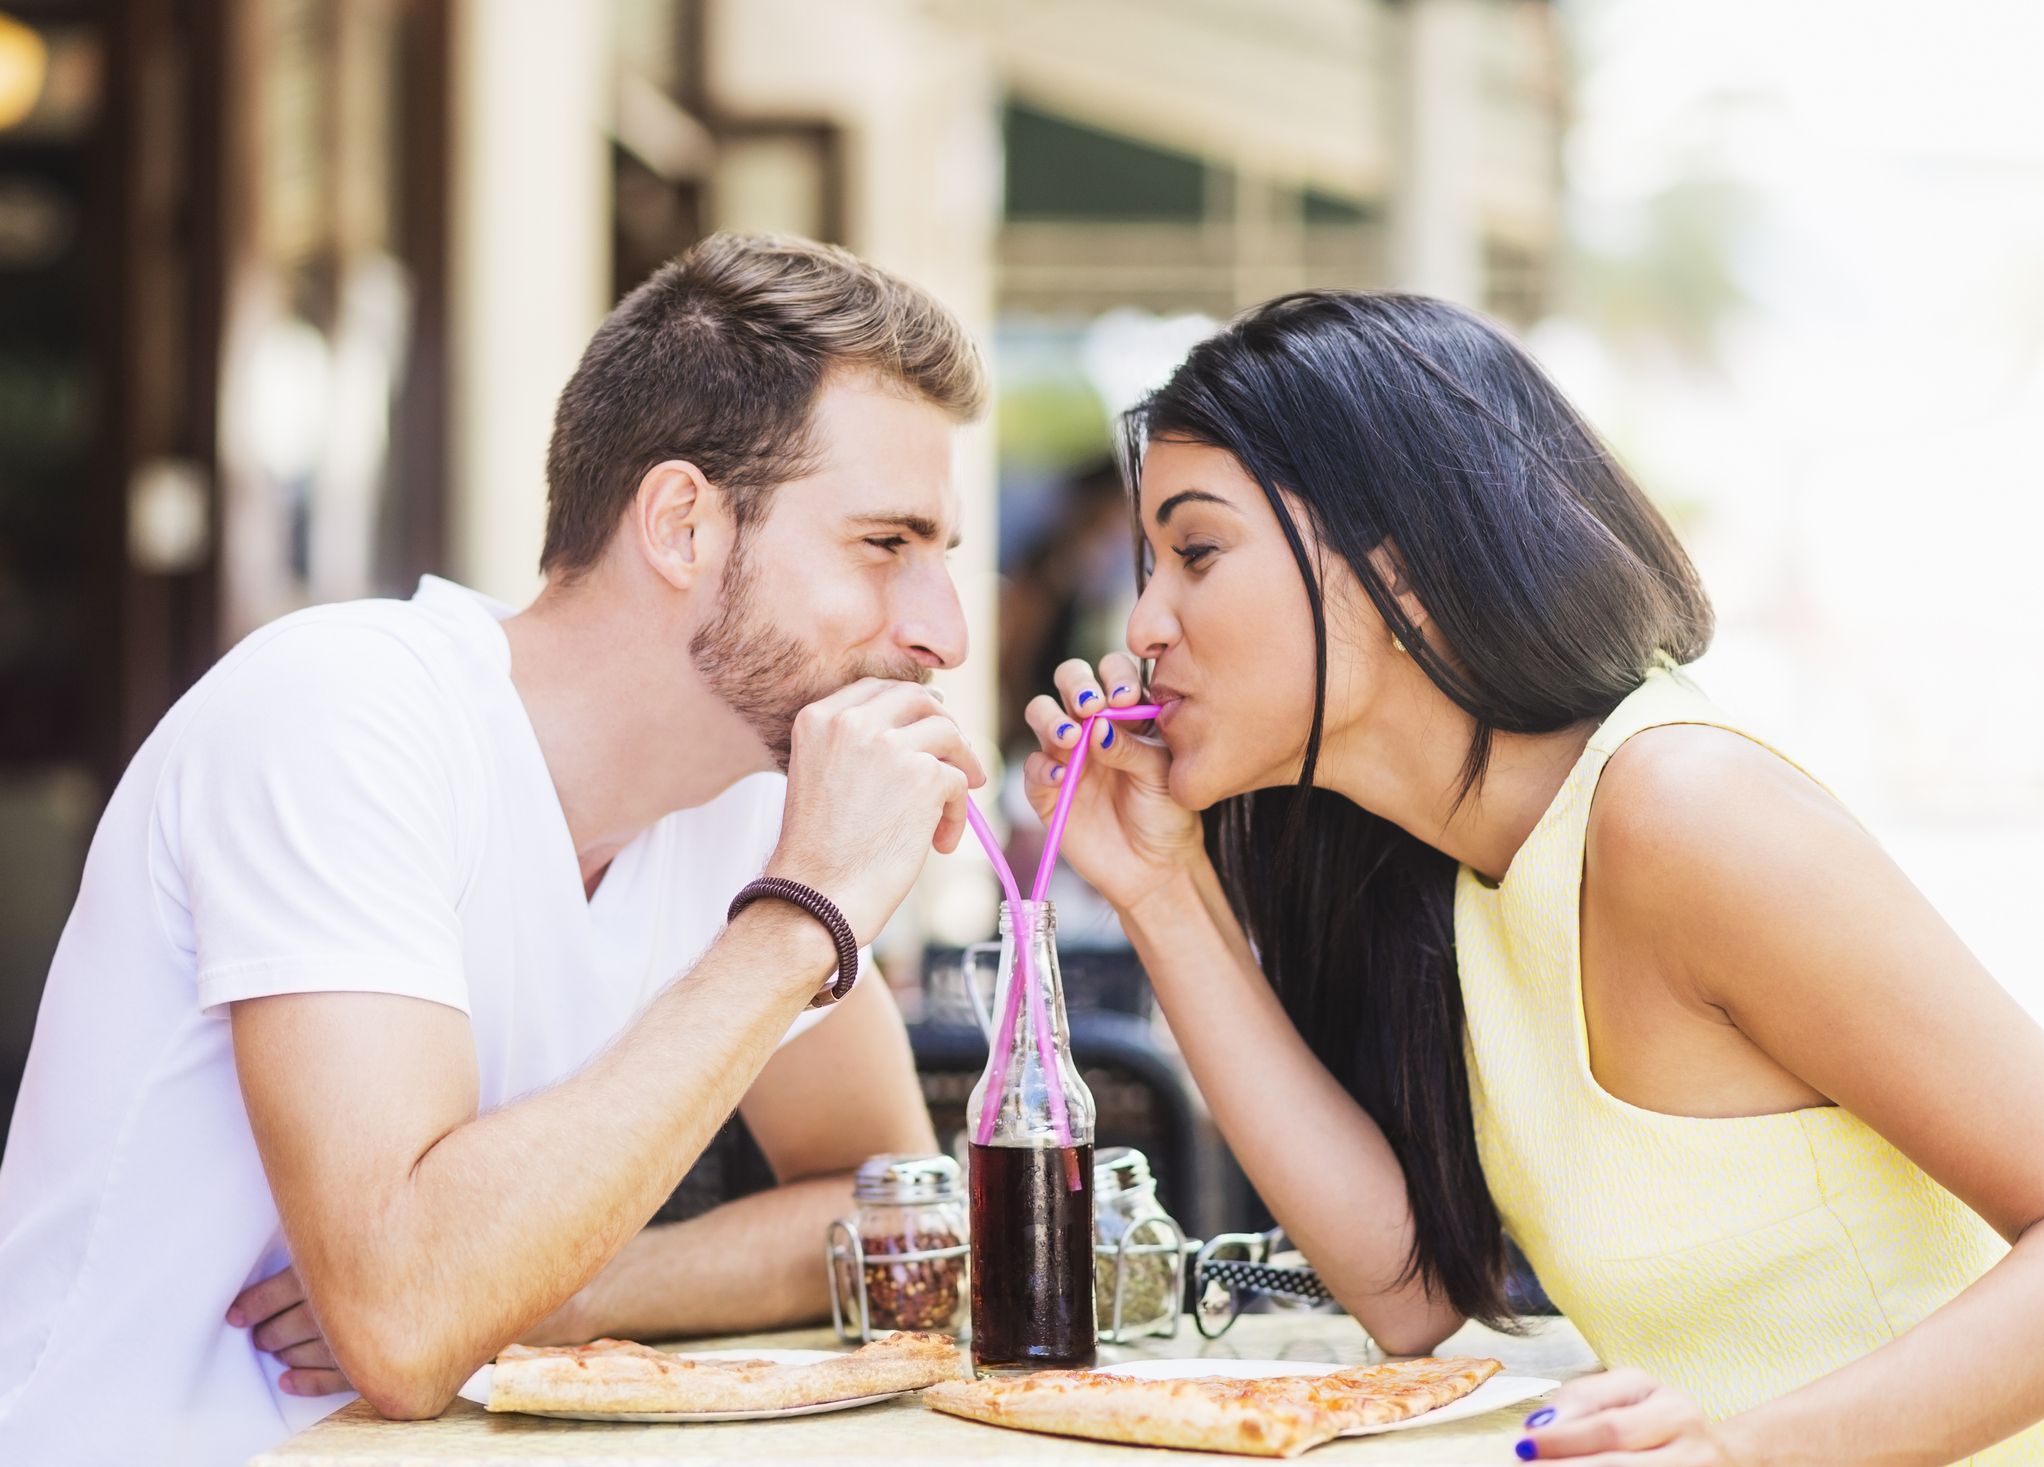 Relationship Dos and Don'ts - Long-Distance Dating